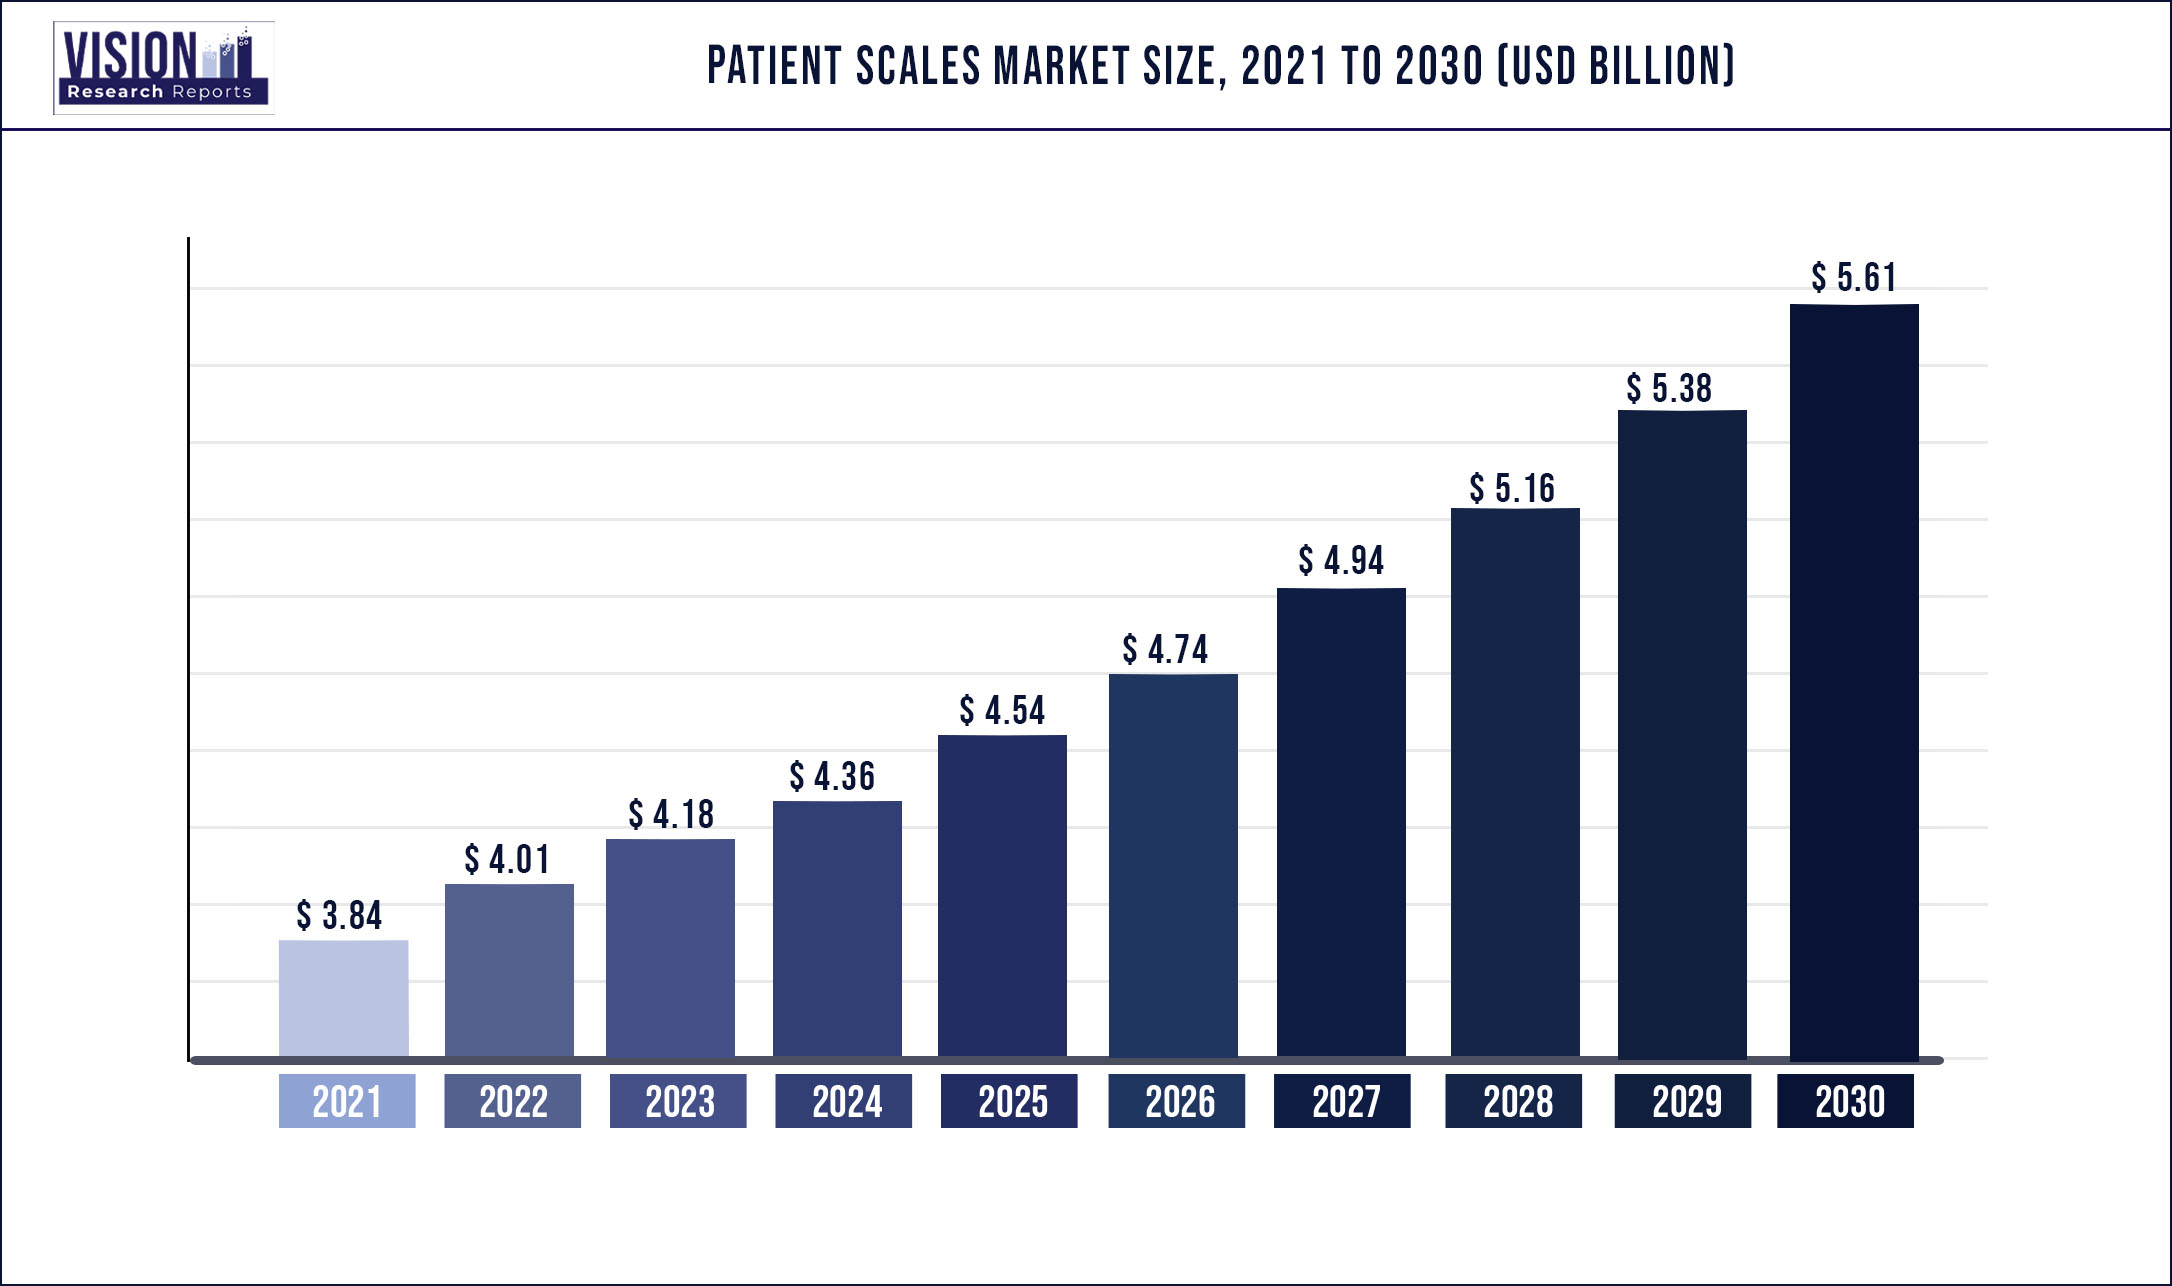 Patient Scales Market Size 2021 to 2030